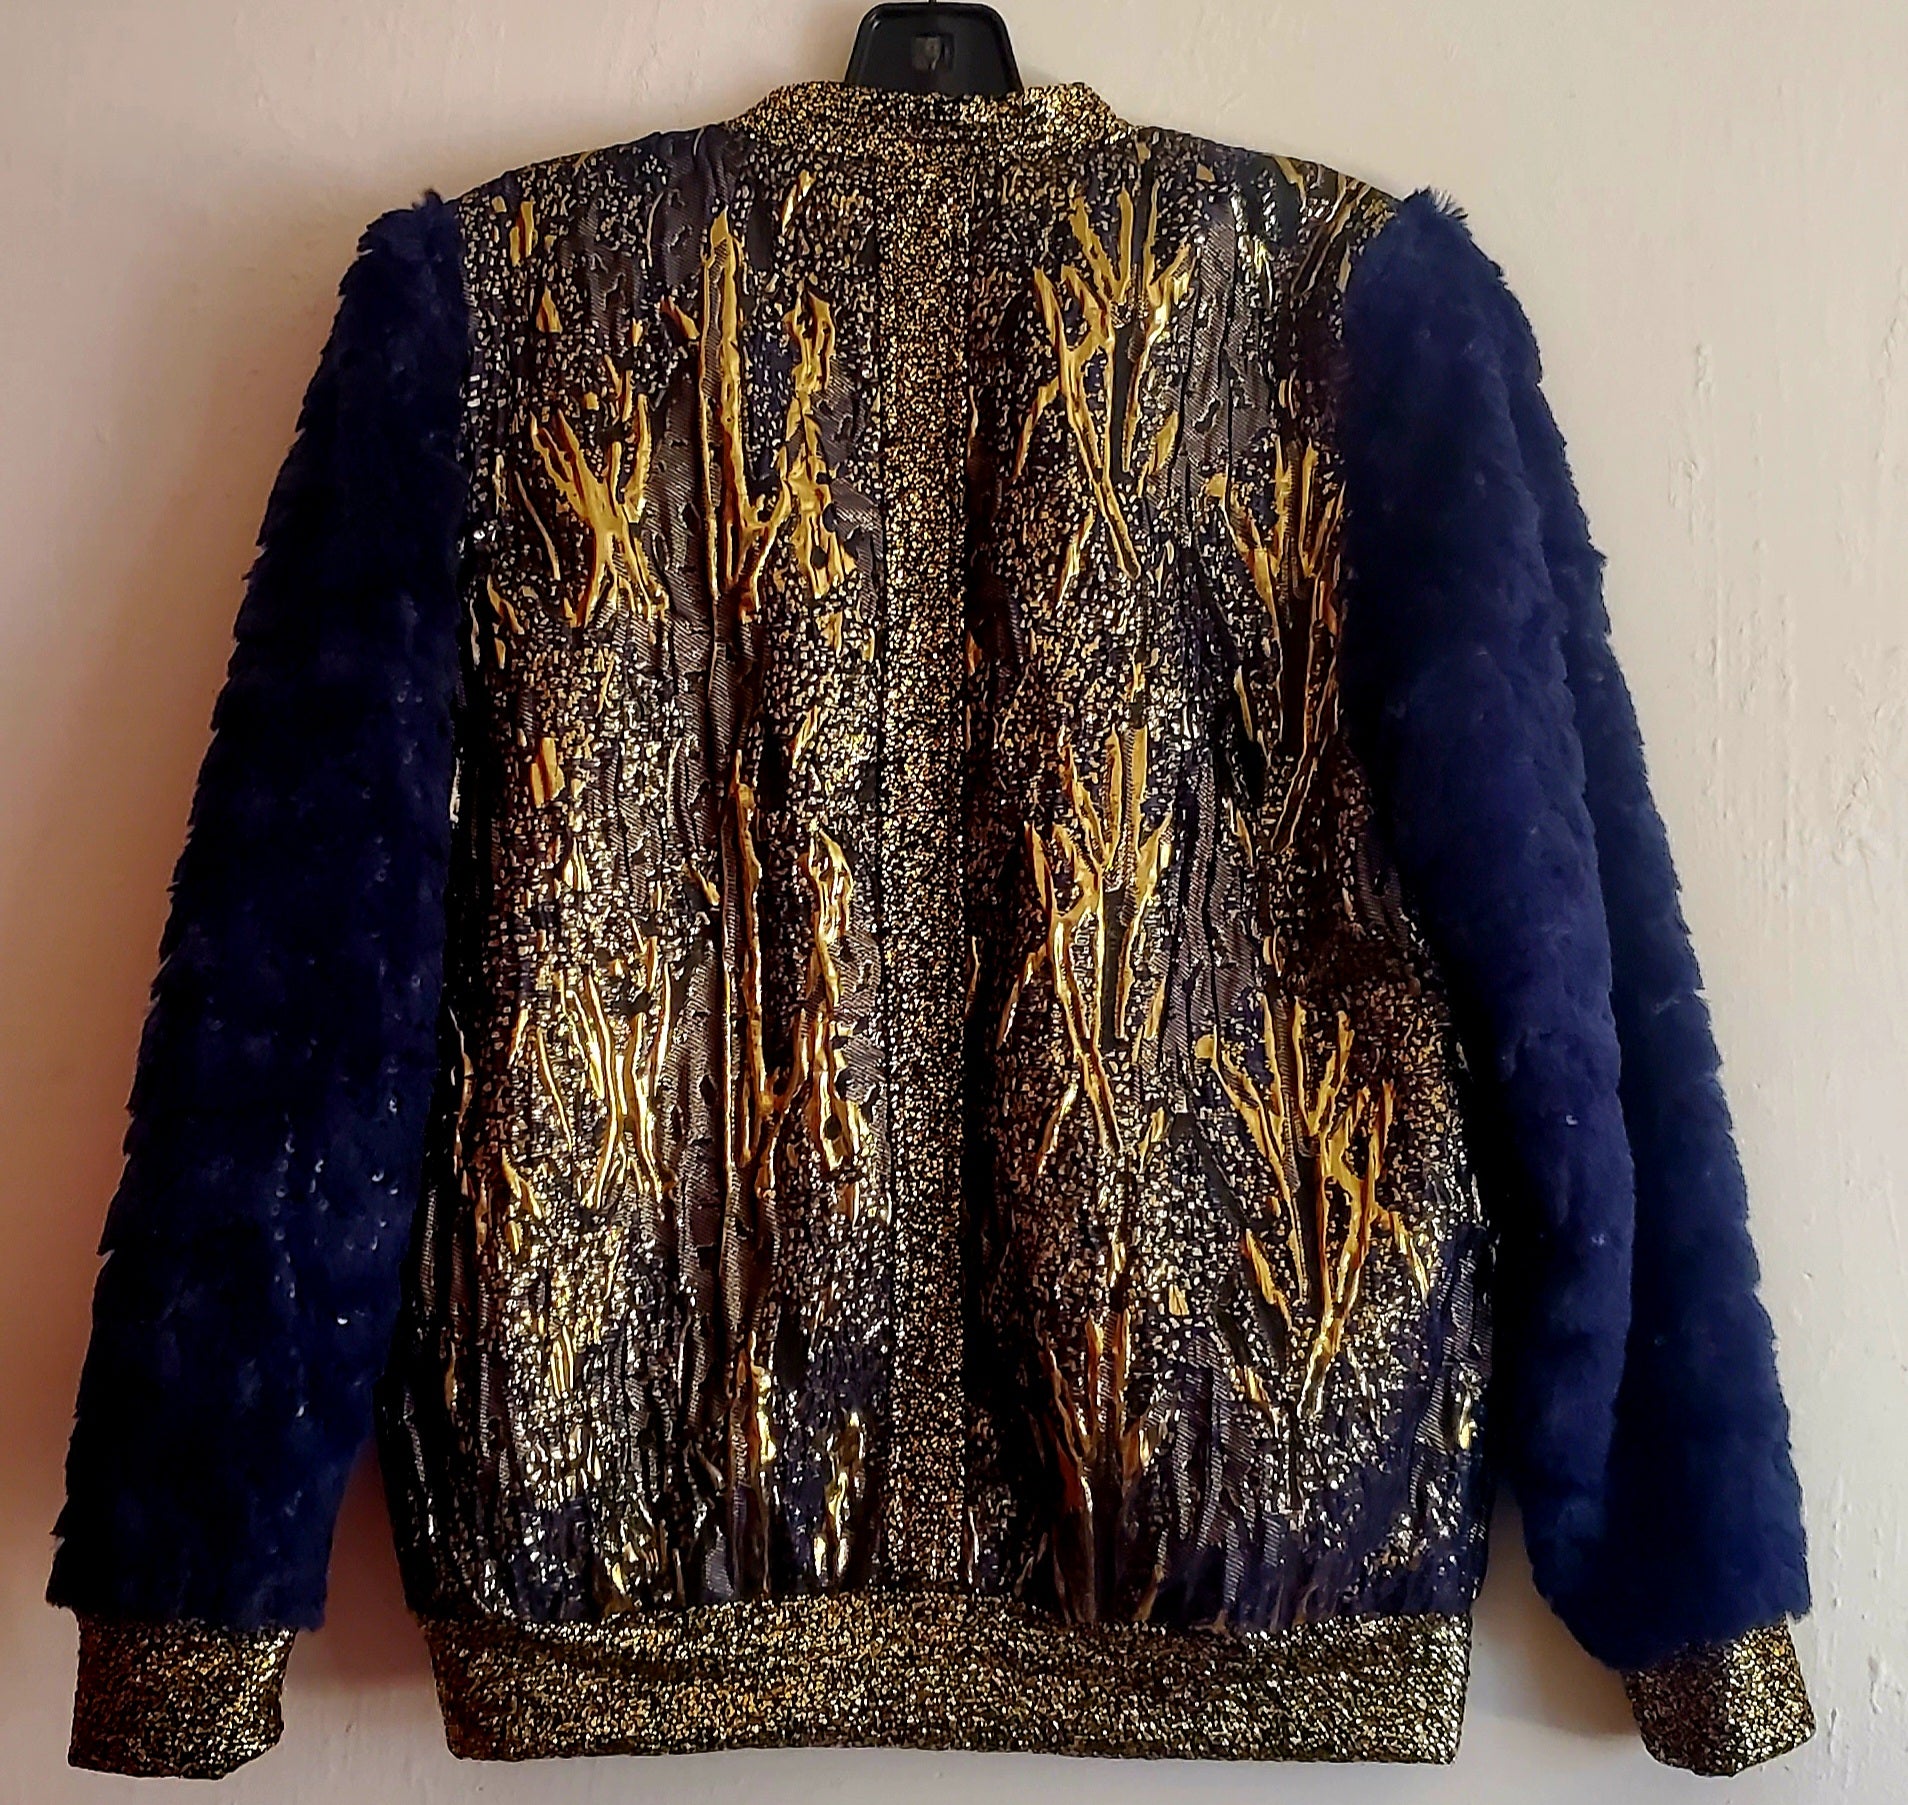 BLEU ROYALE-Blue and Gold brocade bomber jacket with sequined faux fur sleeves